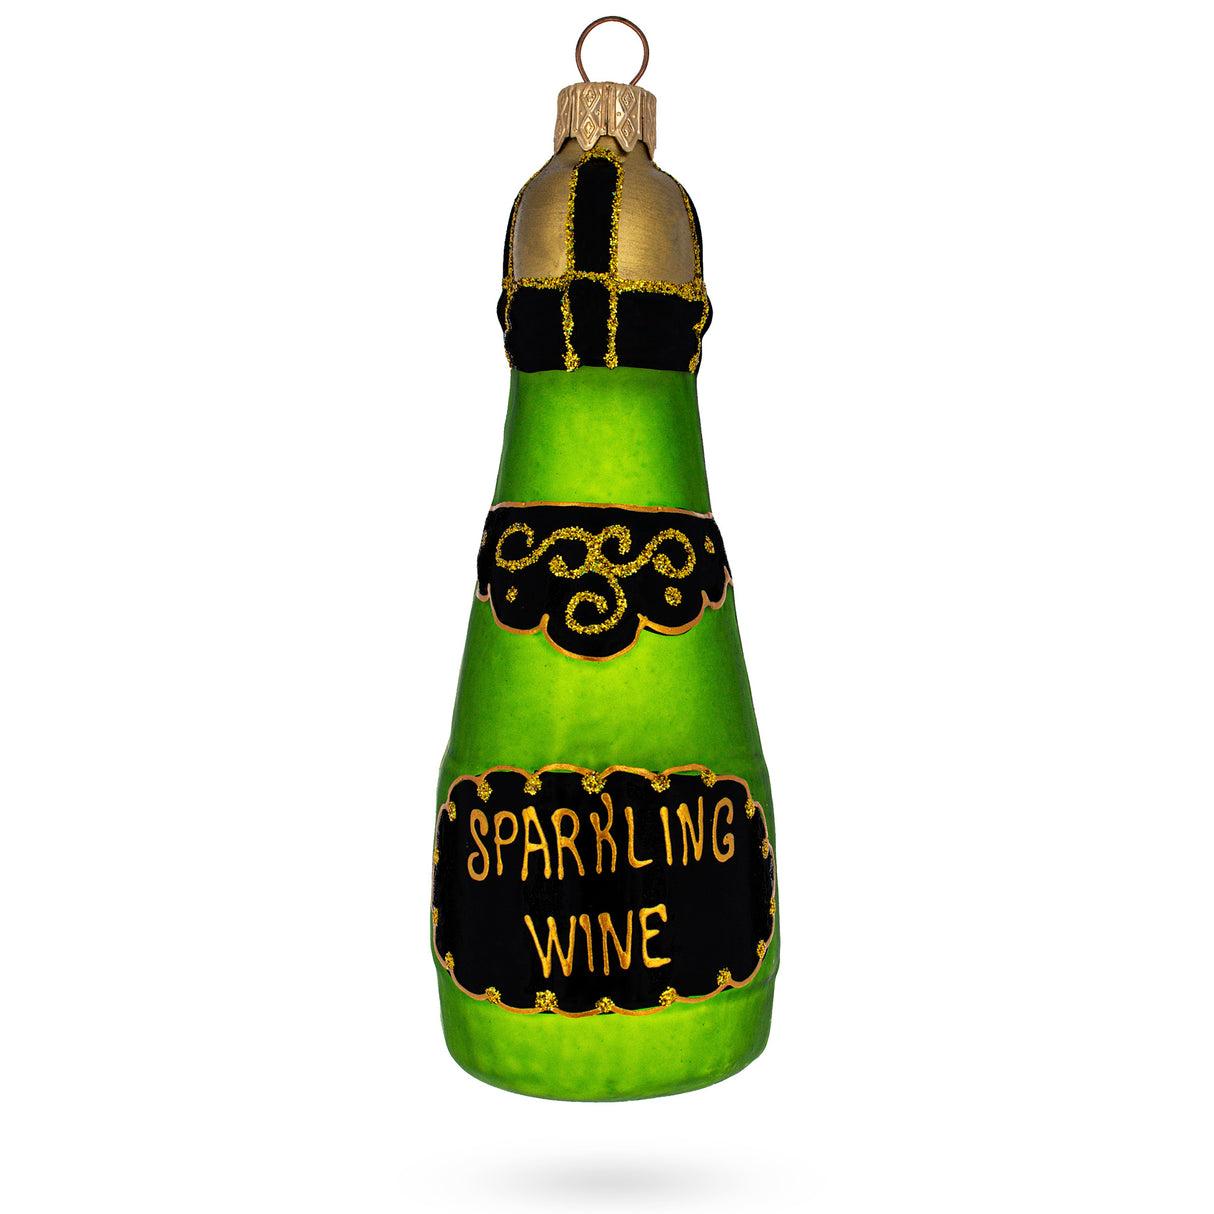 Bottle of Sparkling Wine Champagne Glass Christmas Ornament in Green color,  shape